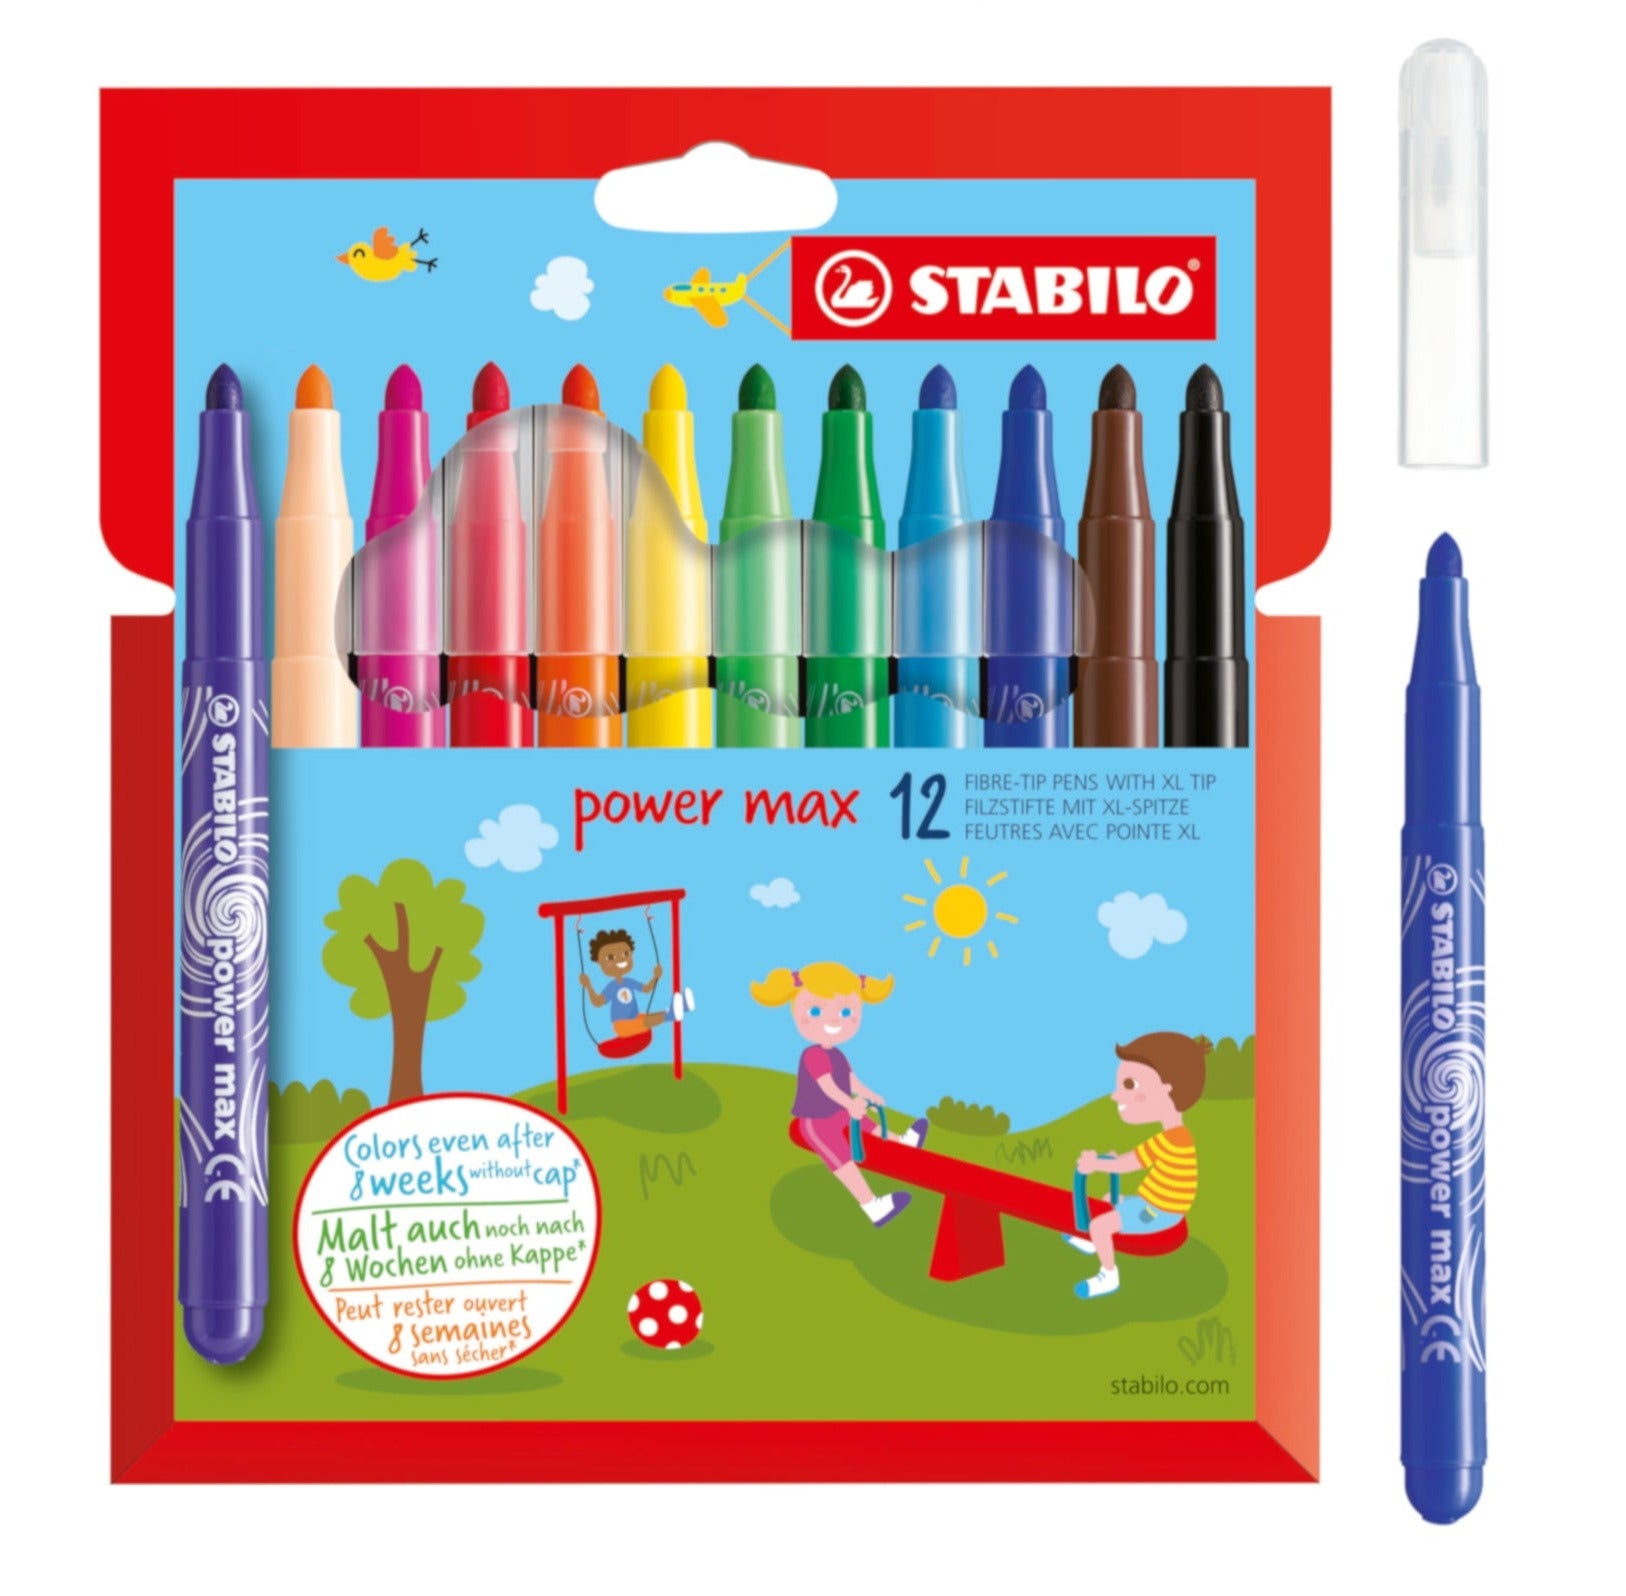 STABILO Power Max Extra-Thick Fibre-Tip Pen - Set of 12 colours - Schwan-STABILO -Most colourful Stationery Shop